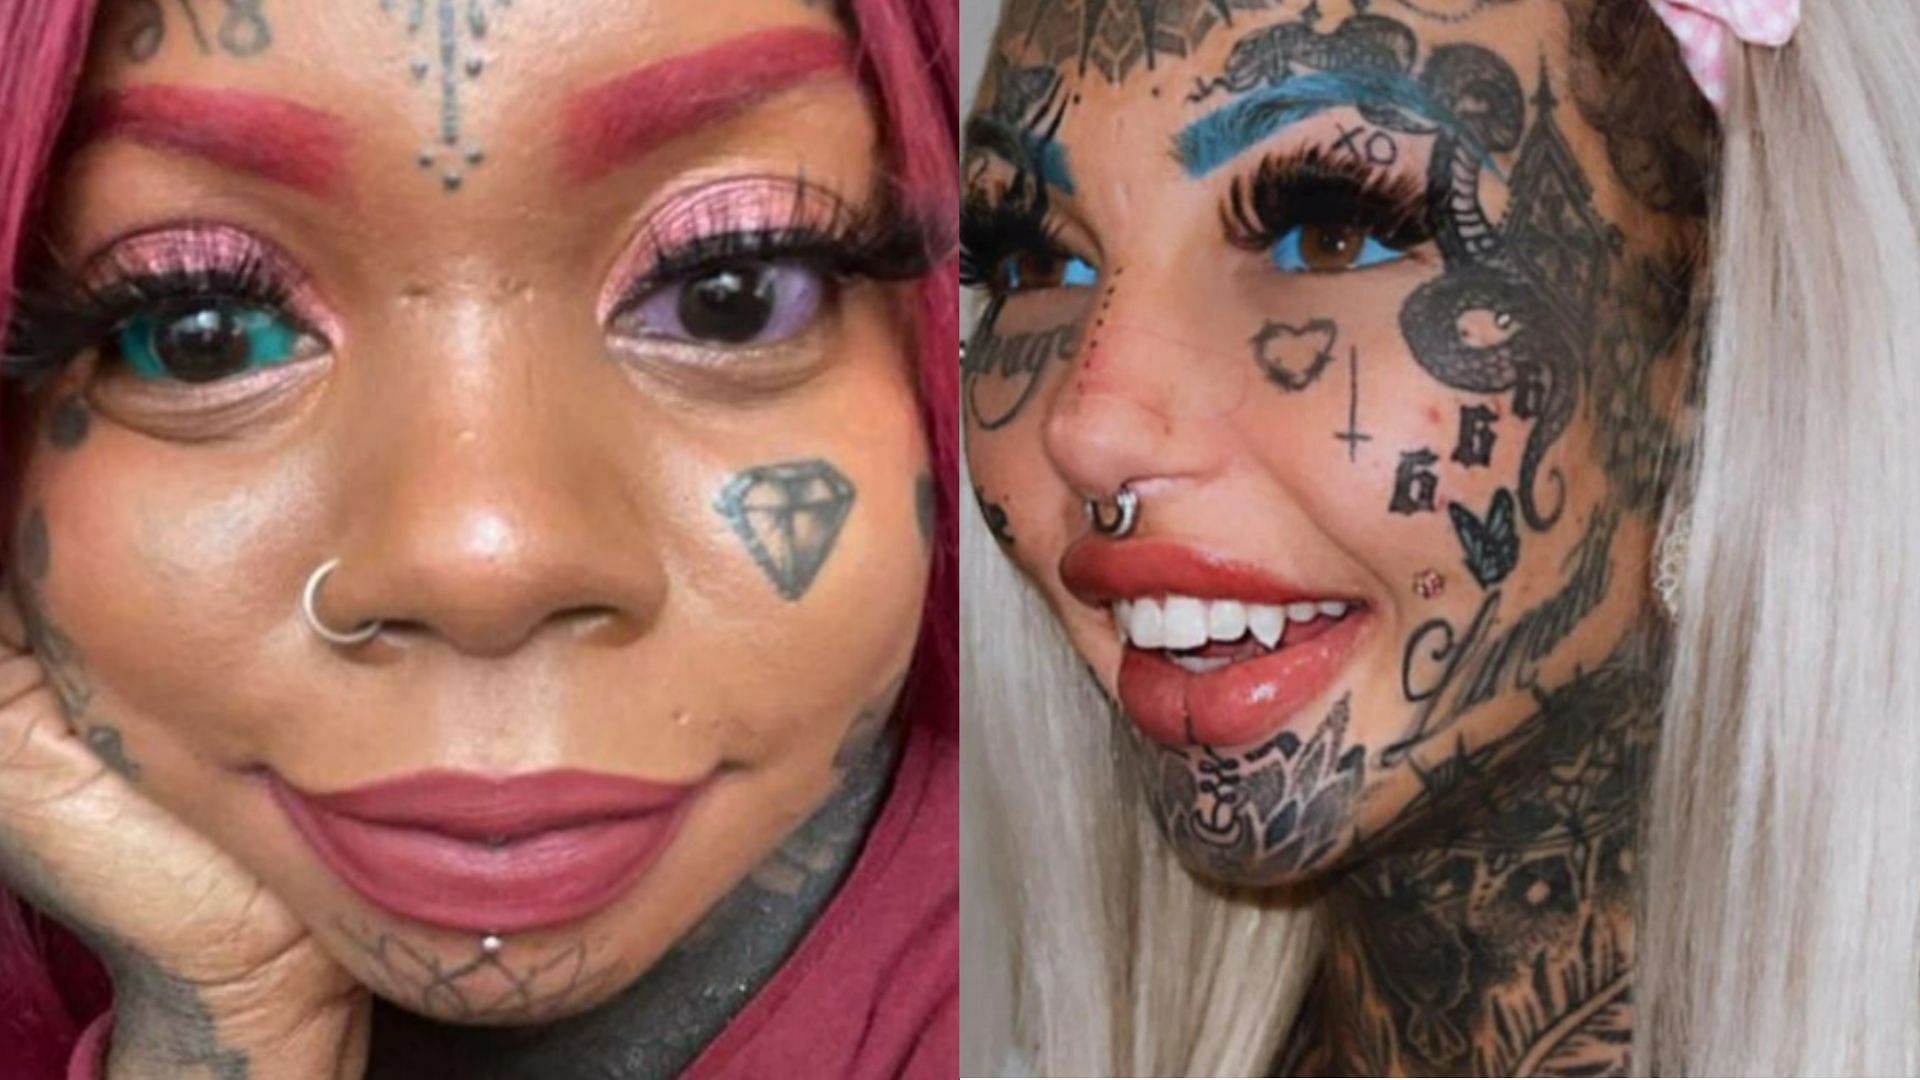 Brutal eyeball tattoos left a woman blind for three weeks  Culture